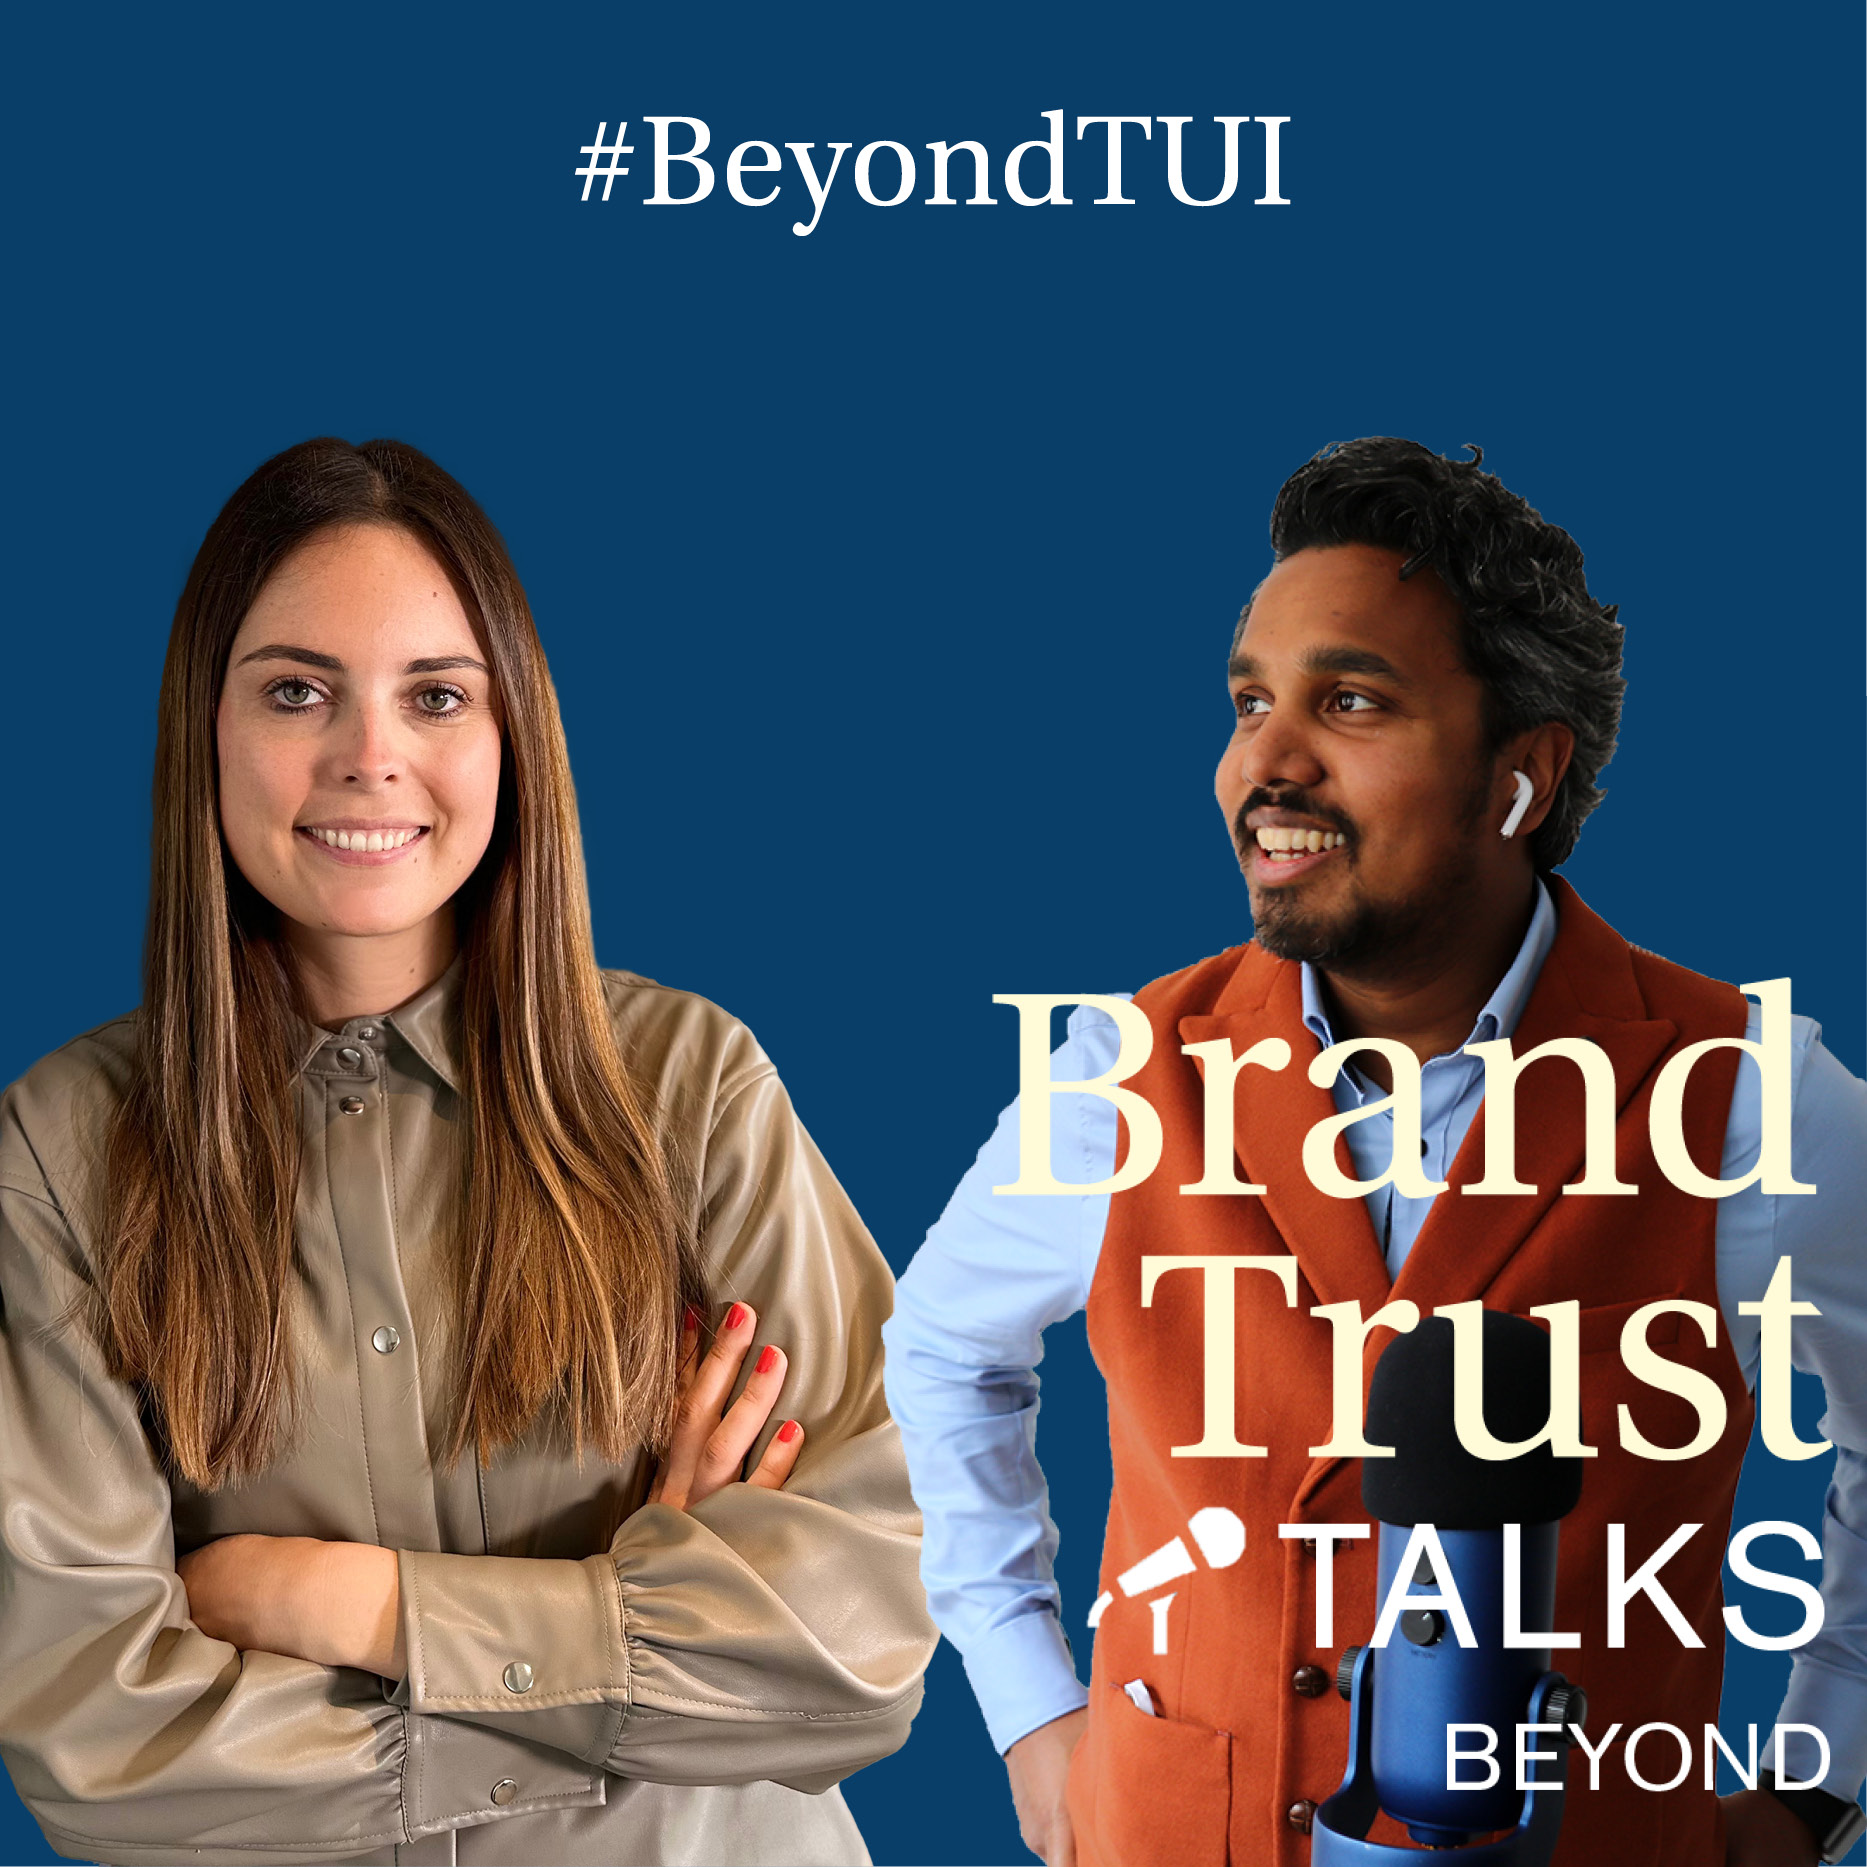 #beyondTUI mit Lena Weber, Head of Global Talent Attraction & Executive Hiring bei TUI